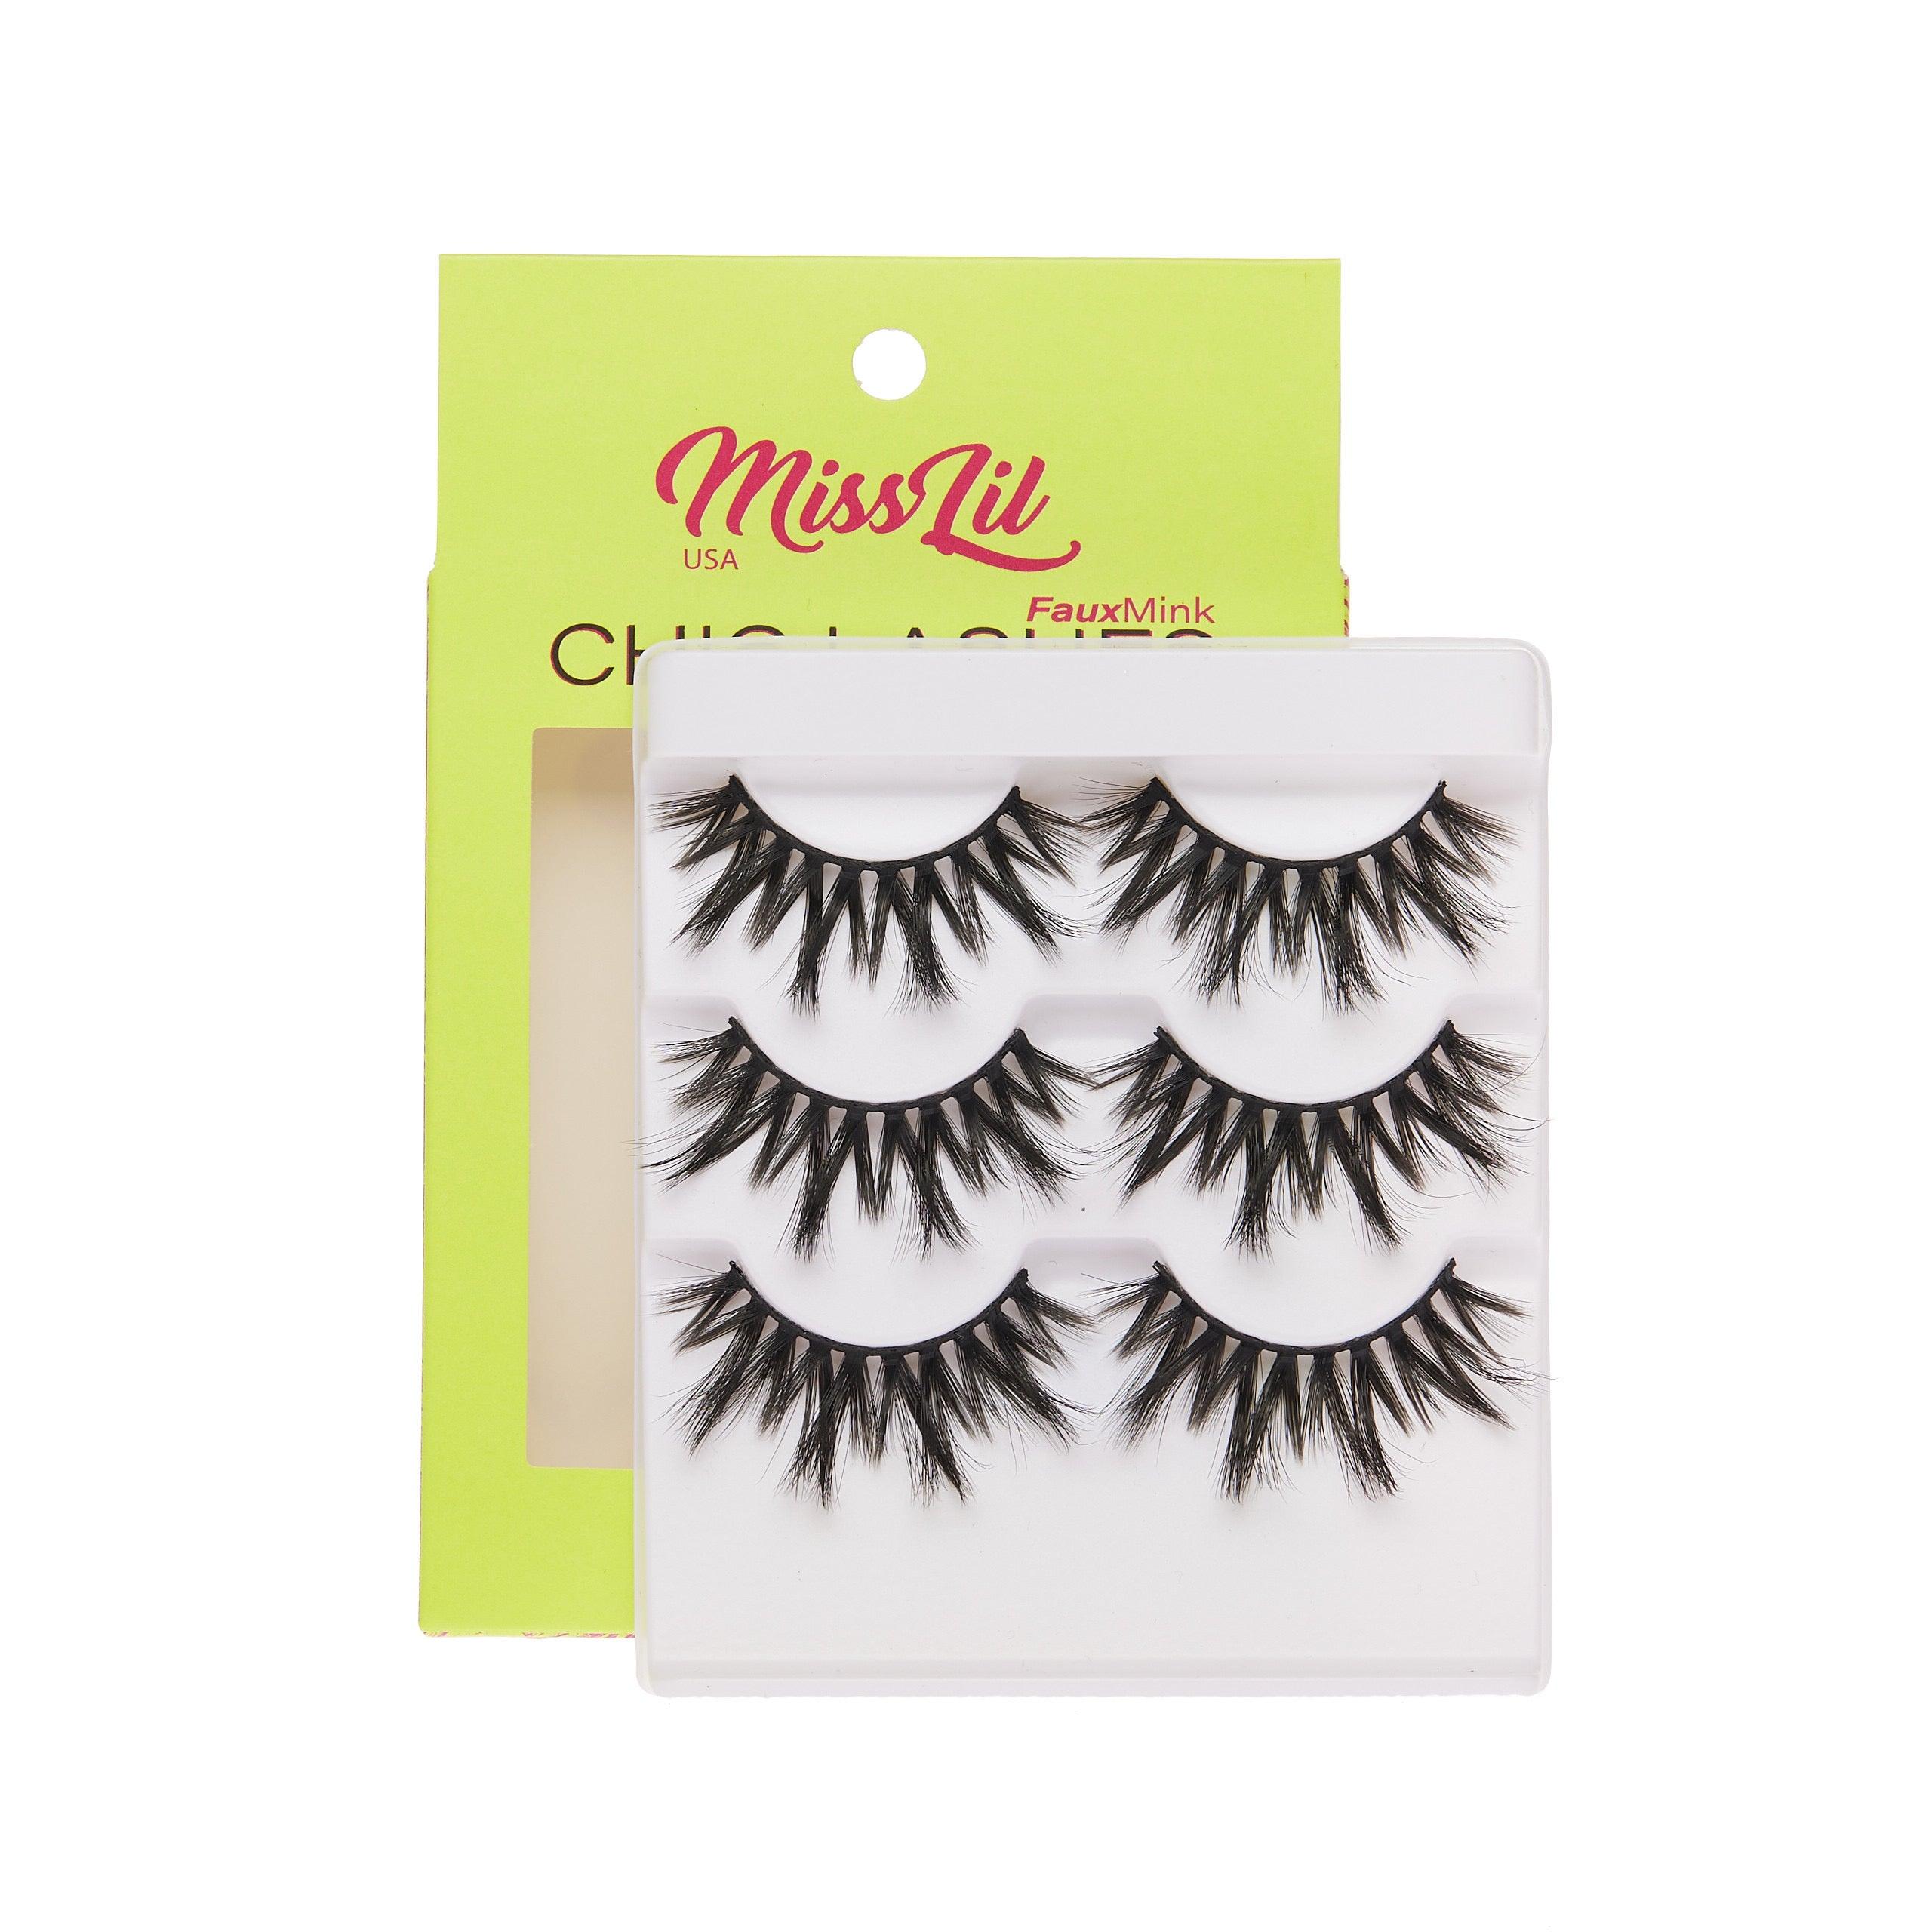 3-Pair Faux Mink Eyelashes - Chic Lashes Collection #20 - Pack of 3 - Miss Lil USA